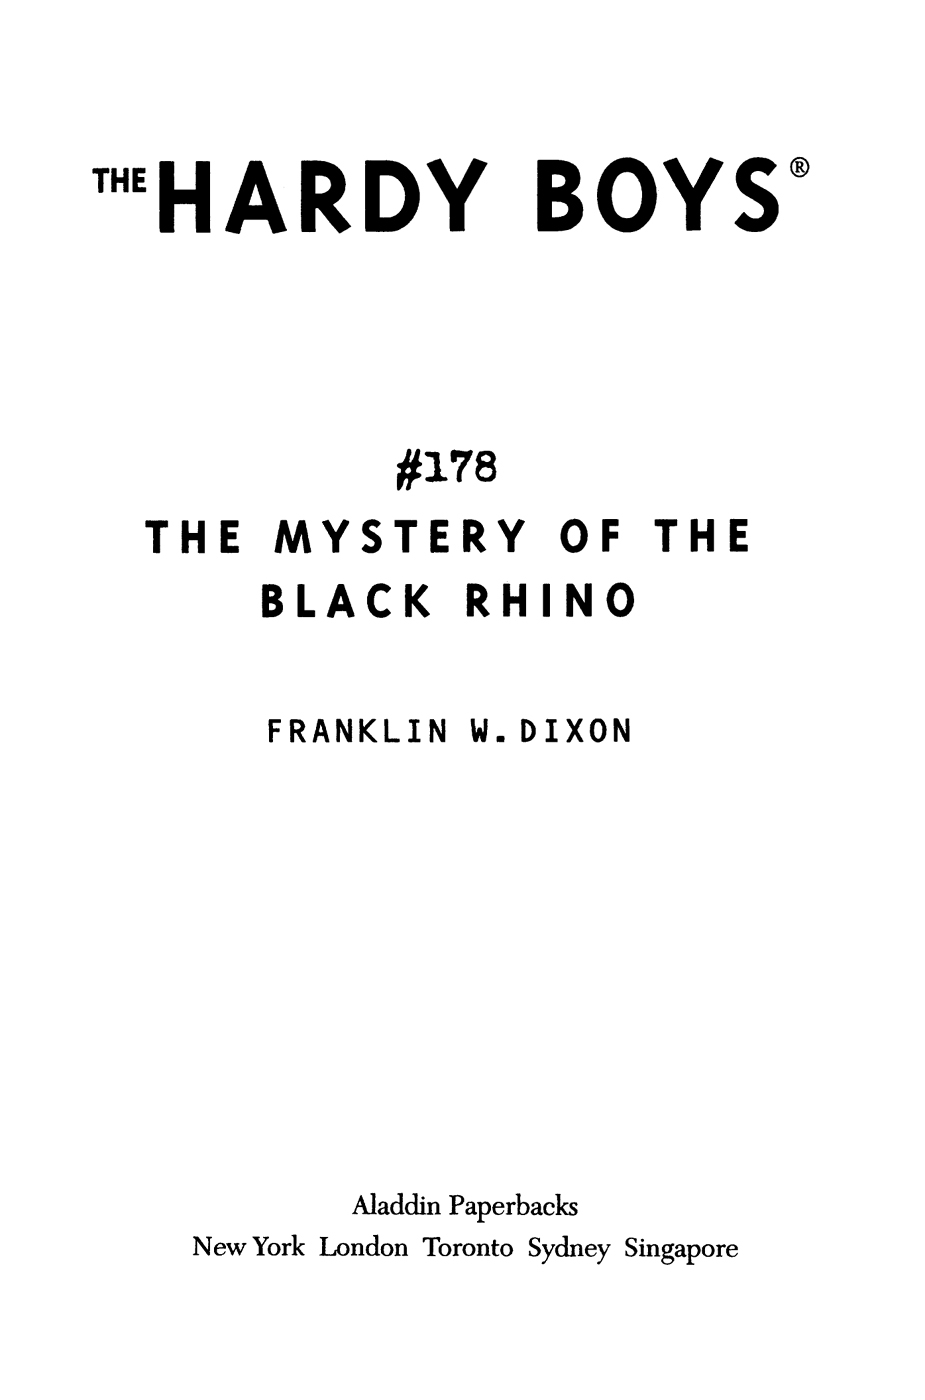 The Mystery of the Black Rhino